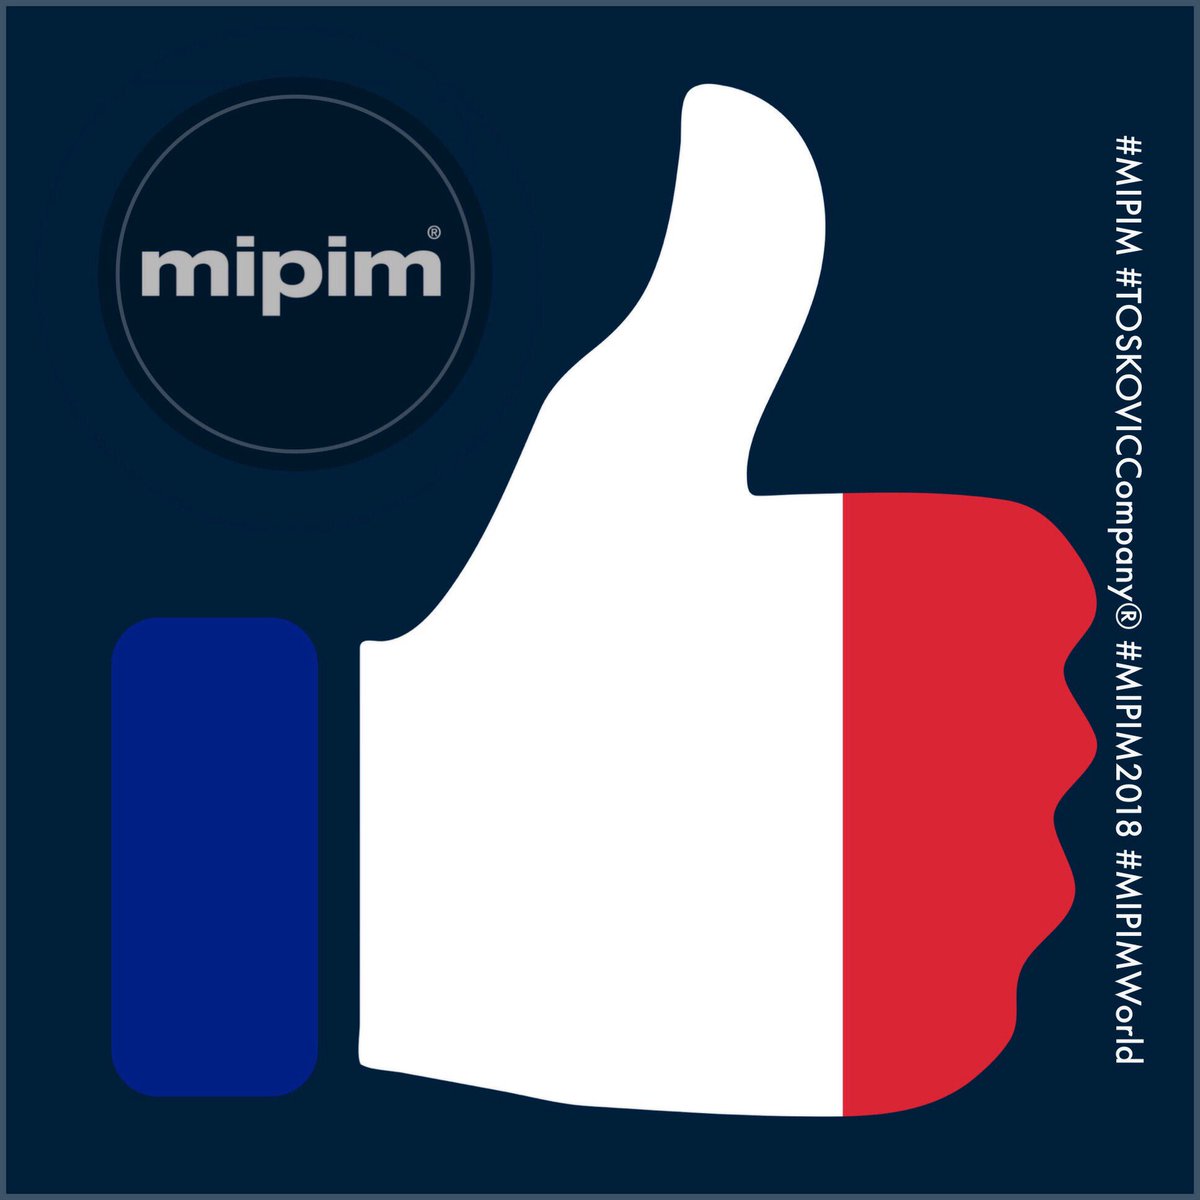 🗣 See you SOON at #MIPIM in #Cannes #France 13-16 March 2018 #MIPIM2018 #MIPIMWorld #CôtedAzure #CôtedAzureFrance #MIPIMCannes2018 #MIPIMFrance2018 #PalaisDesFestivalsCannes #TOSKOVICEspaña #TOSKOVICCompany® 
MIPIM - the right place to do BUSINESS at MIPIM! #TOSKOVICCompany®